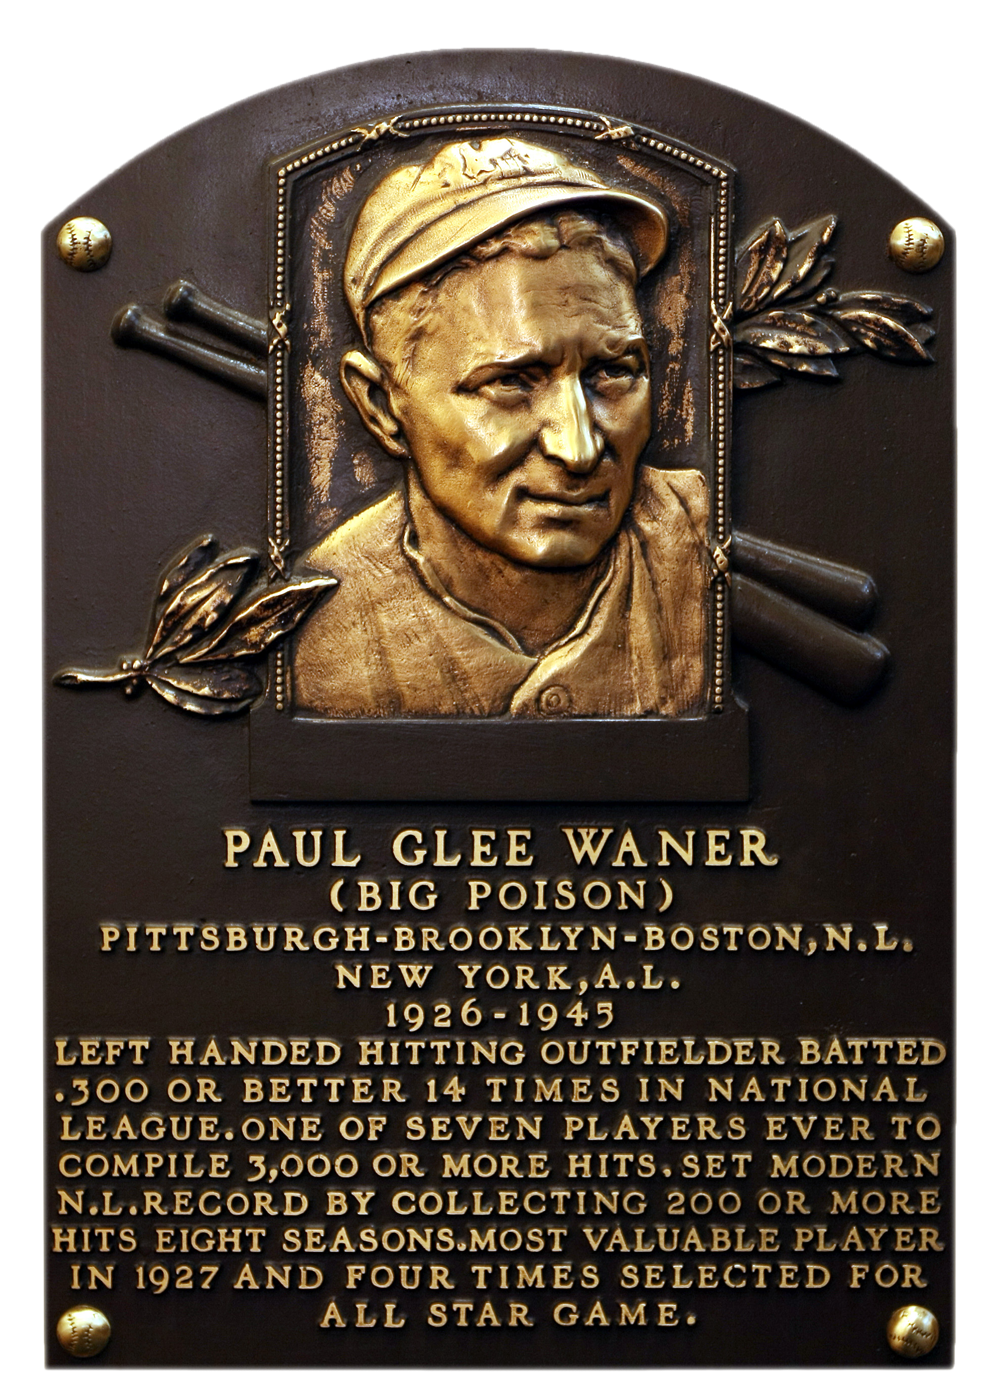 Paul Waner Hall of Fame plaque